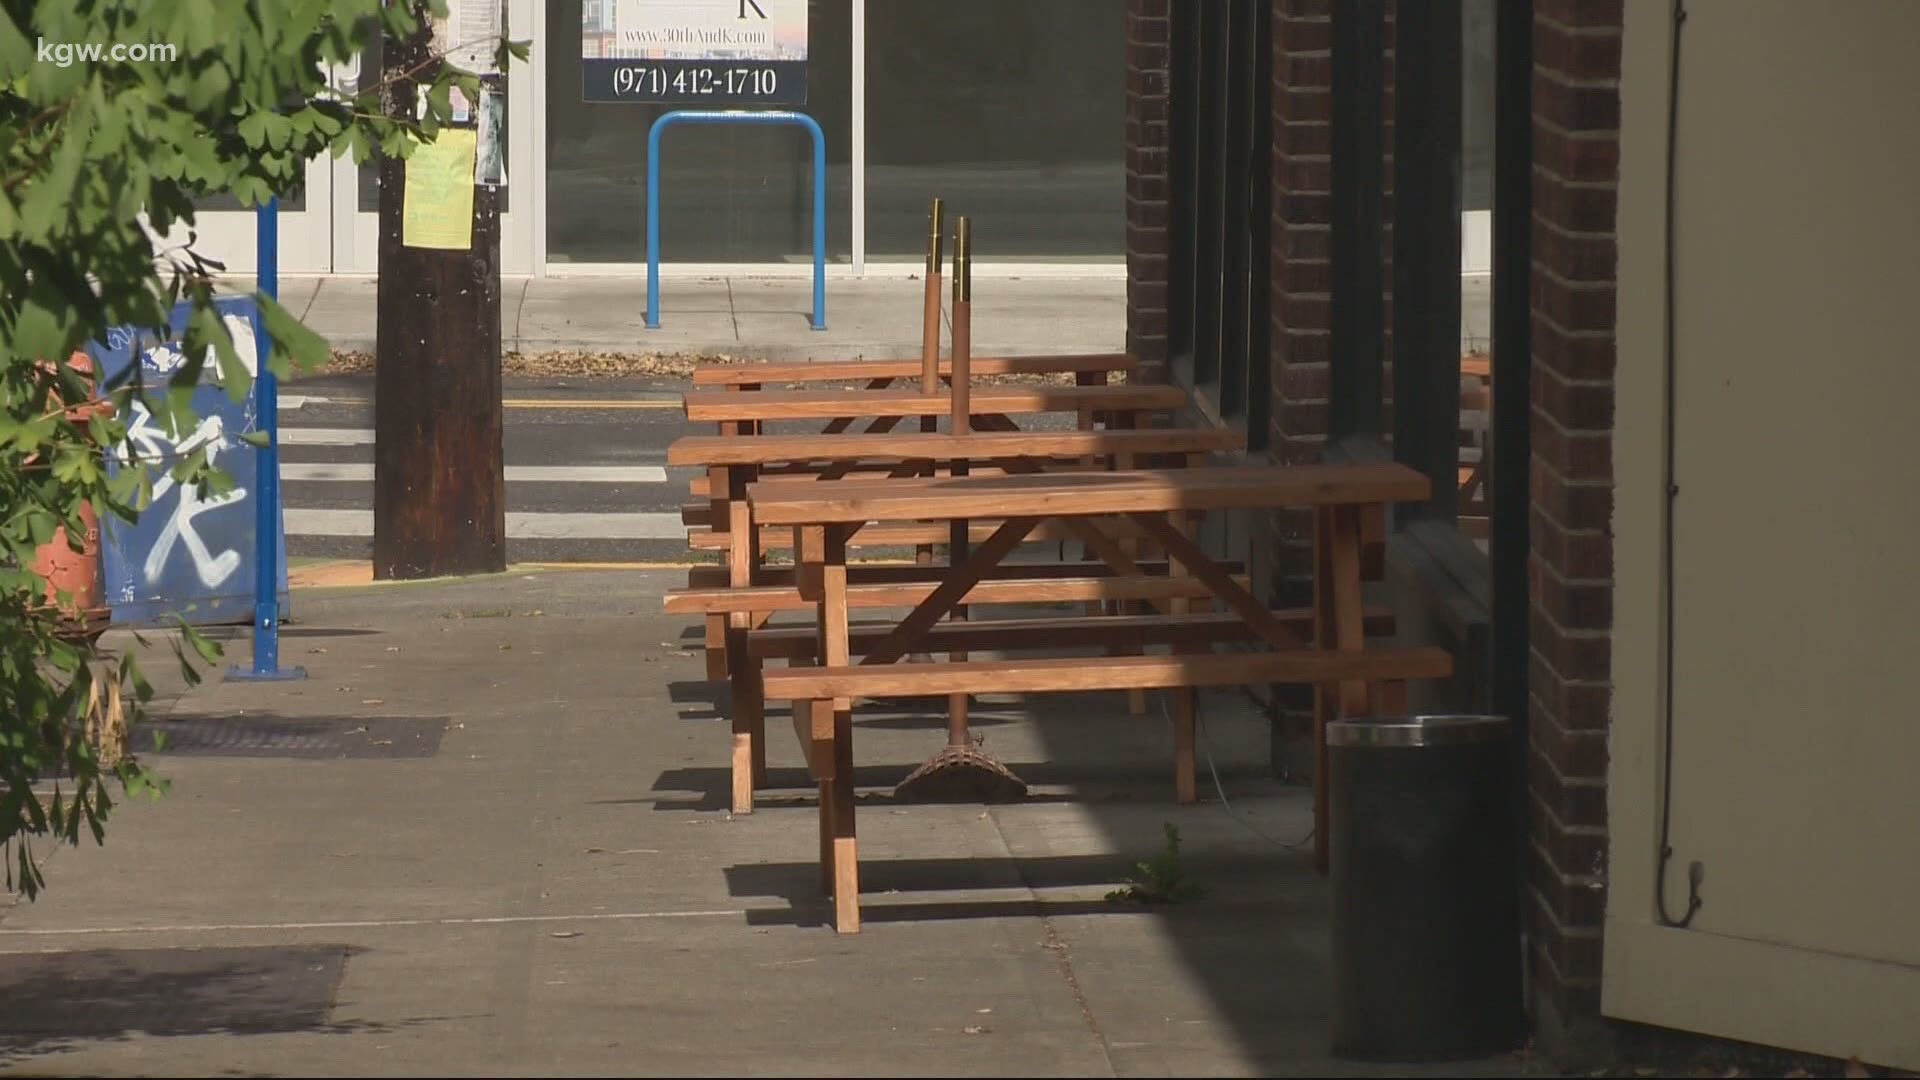 Portland area restaurant owners fear what may happen to their businesses when the weather won’t allow outdoor dining.